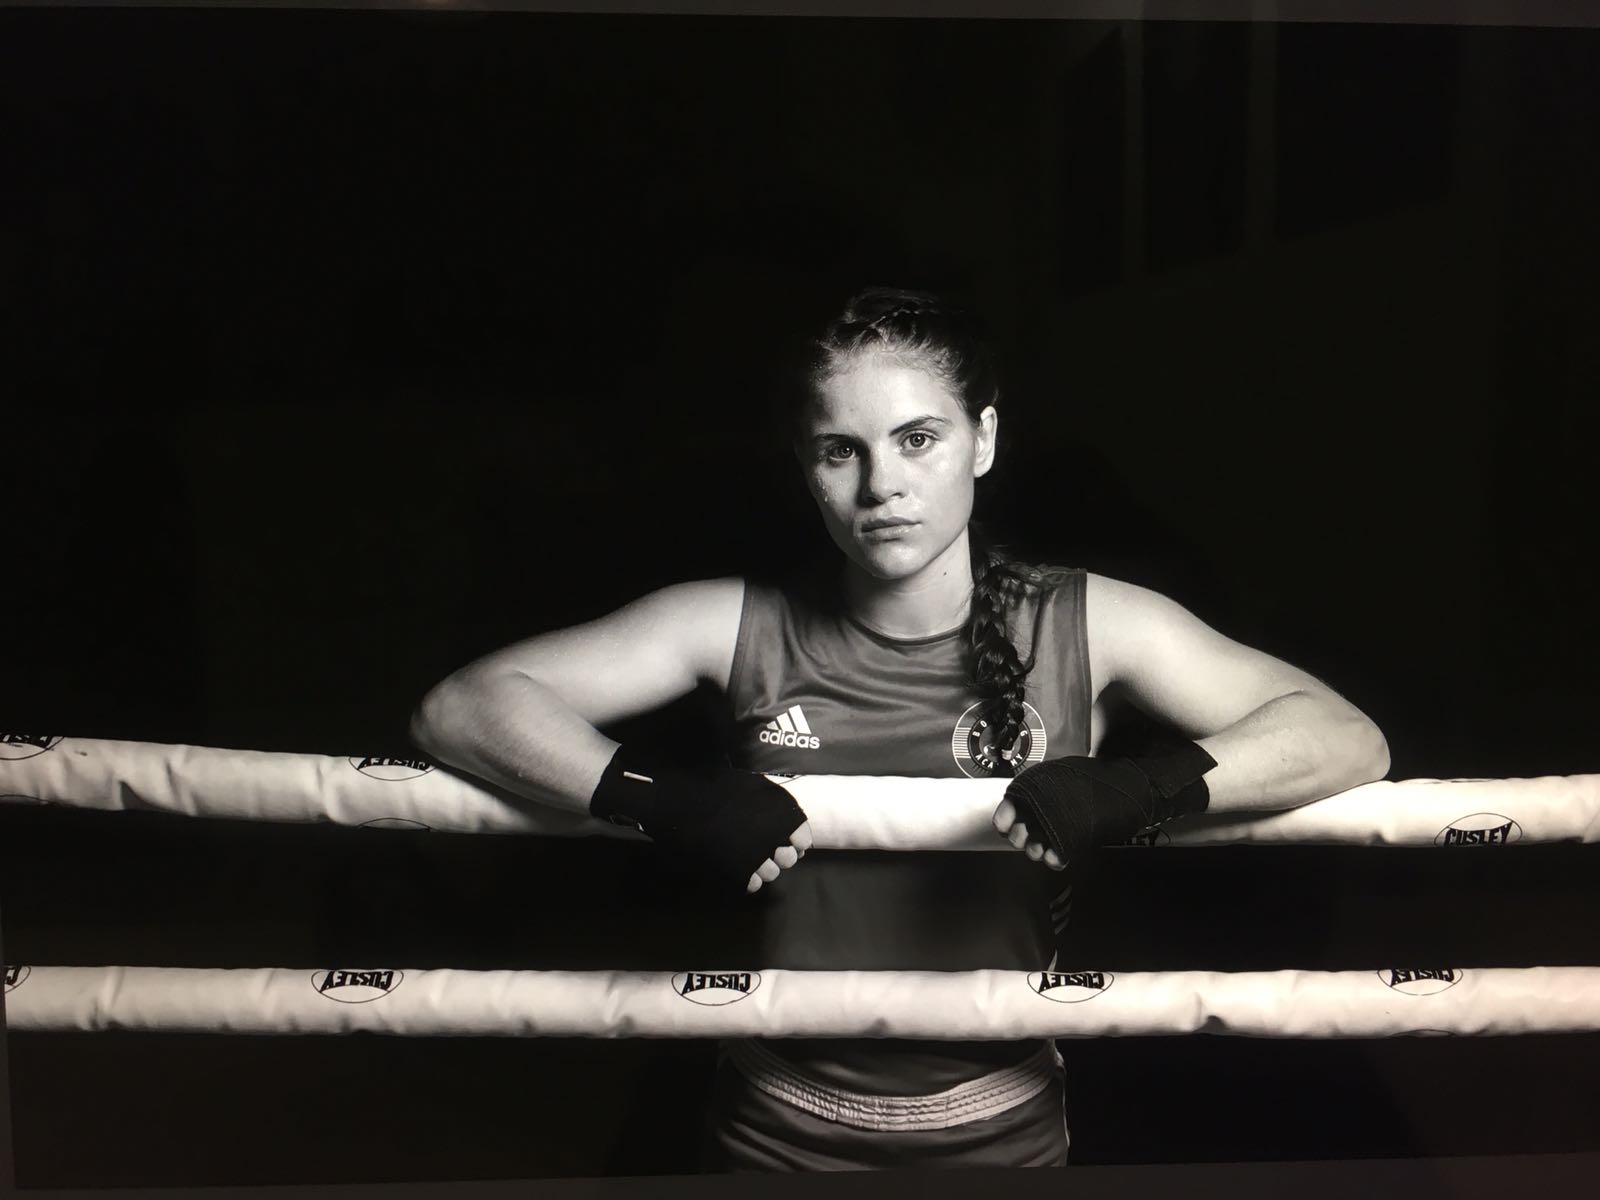 Topboxing talent Alicia Holzken makes the switch to professional kickboxing